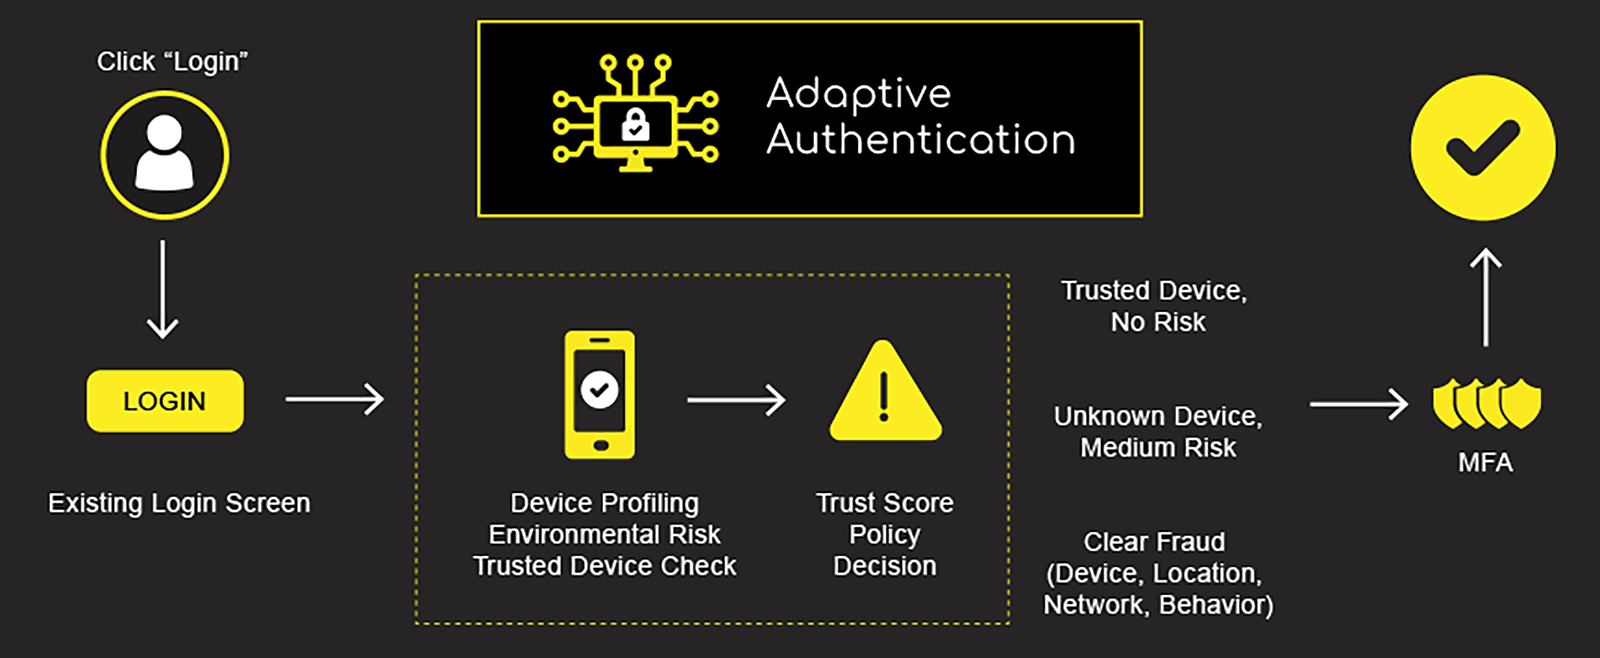 Risk Based Authentication